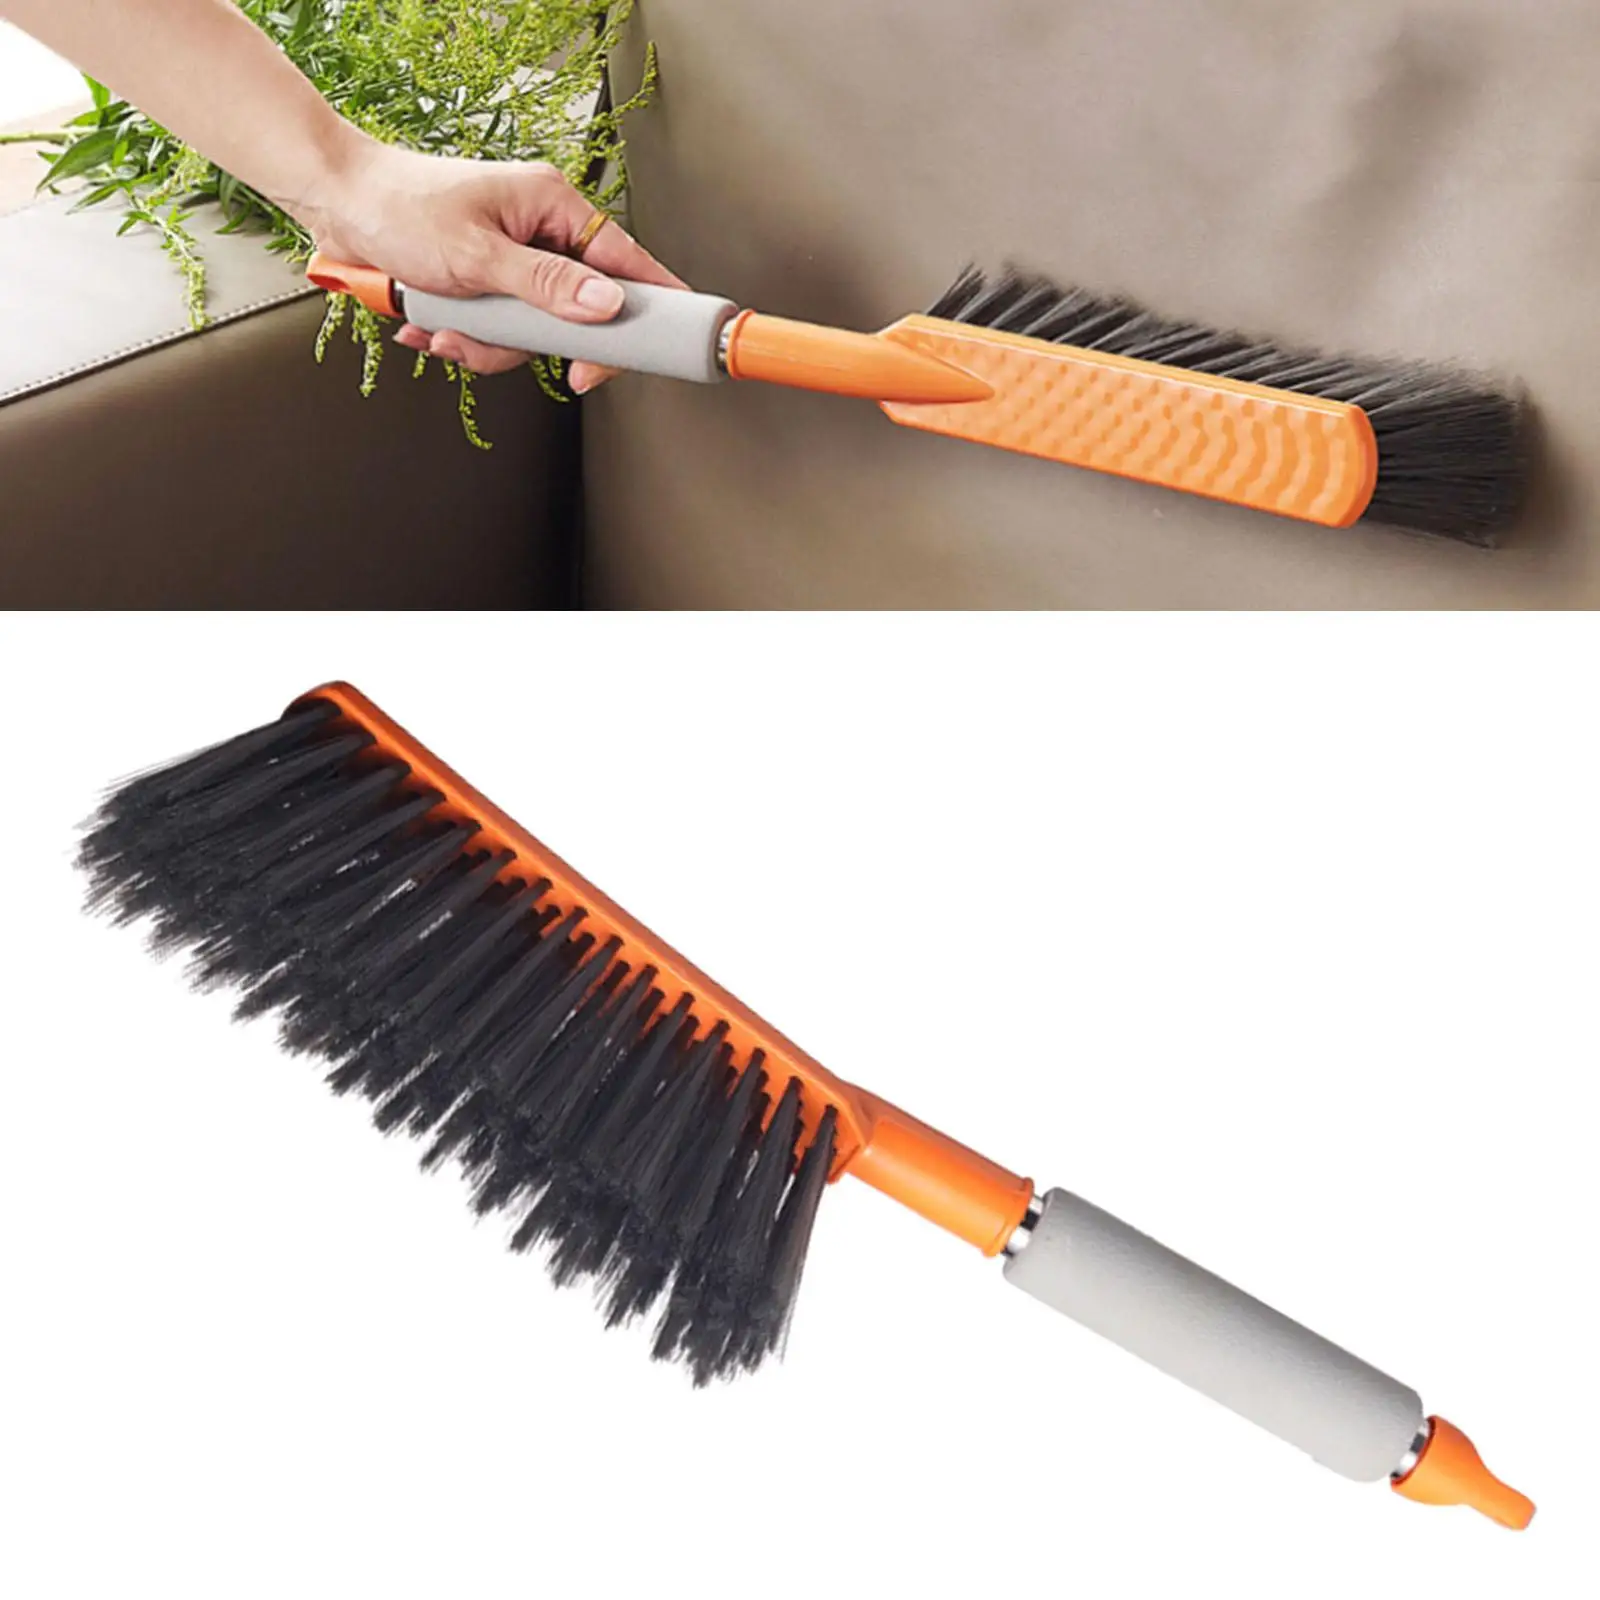 Detachable Bed Brush Long Handle Sofa Cleaning Tool Dust Hair Crumb Remover Soft Bristle Multifunctional Cleaning Brush for Home